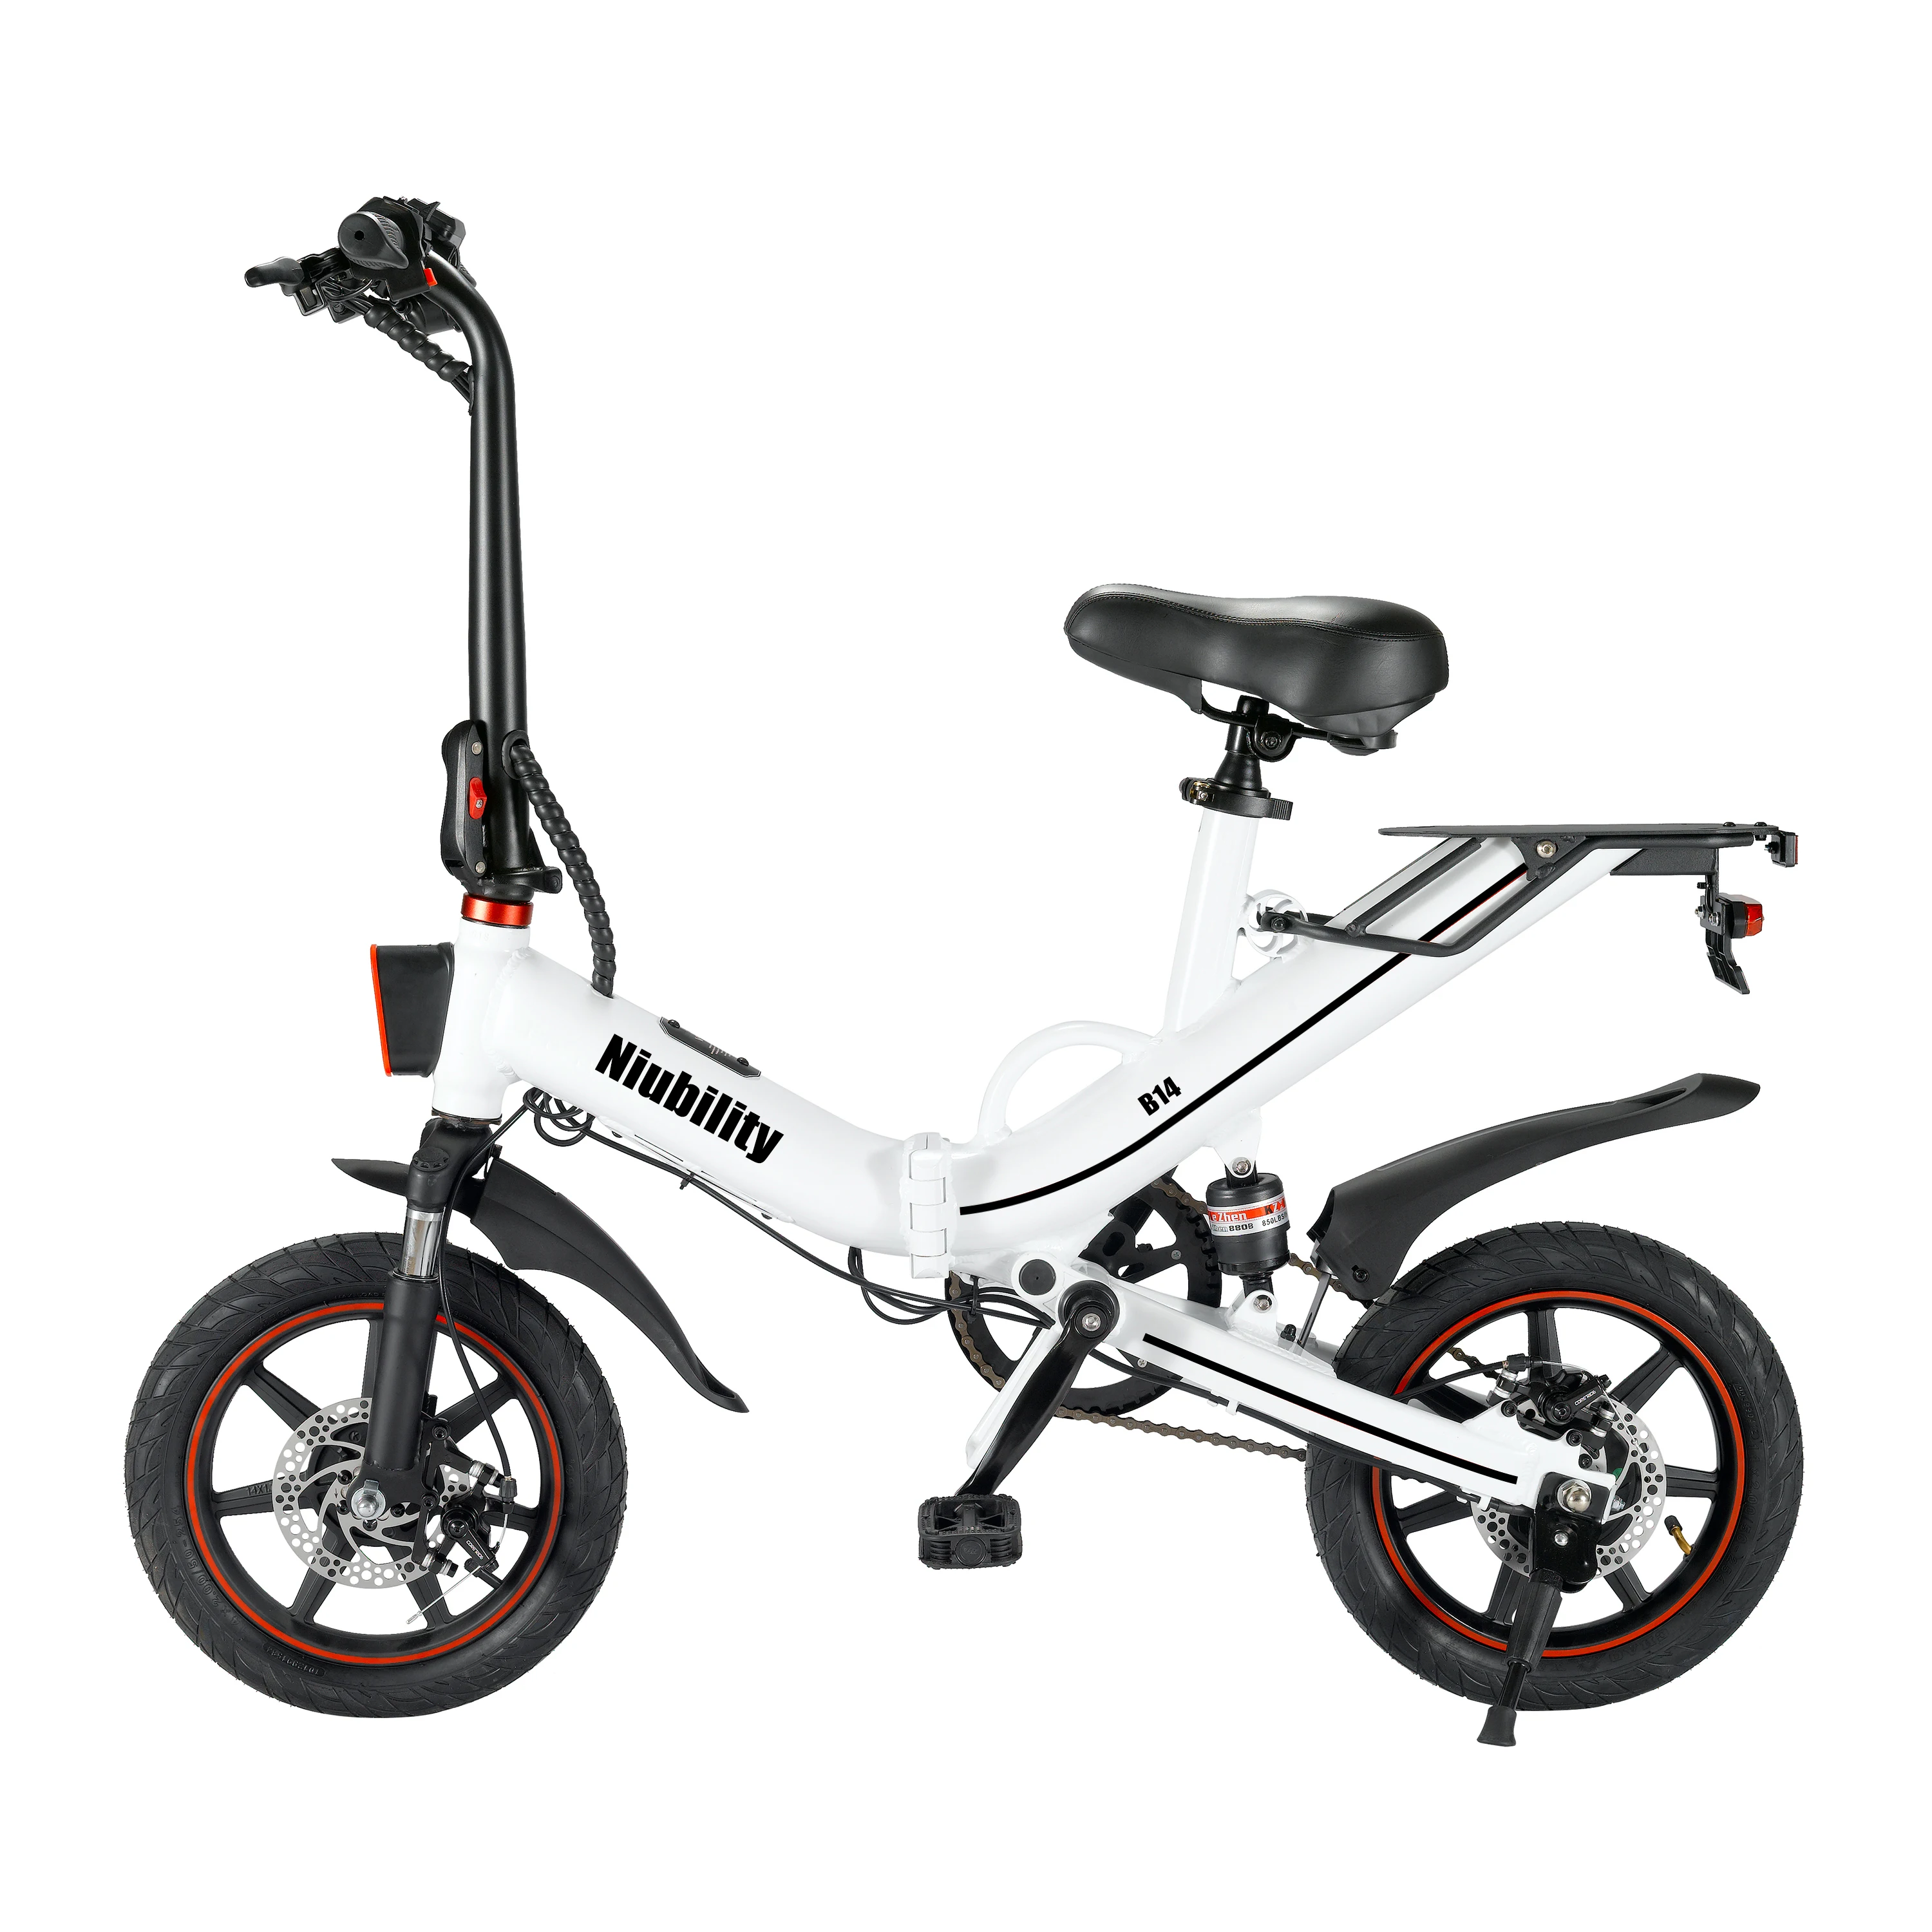 

EU Warehouse Delivery Niubility B14 15Ah 48V Battery 400W Brushless Motor 14 Inches electric city bike 25km/h Top Speed